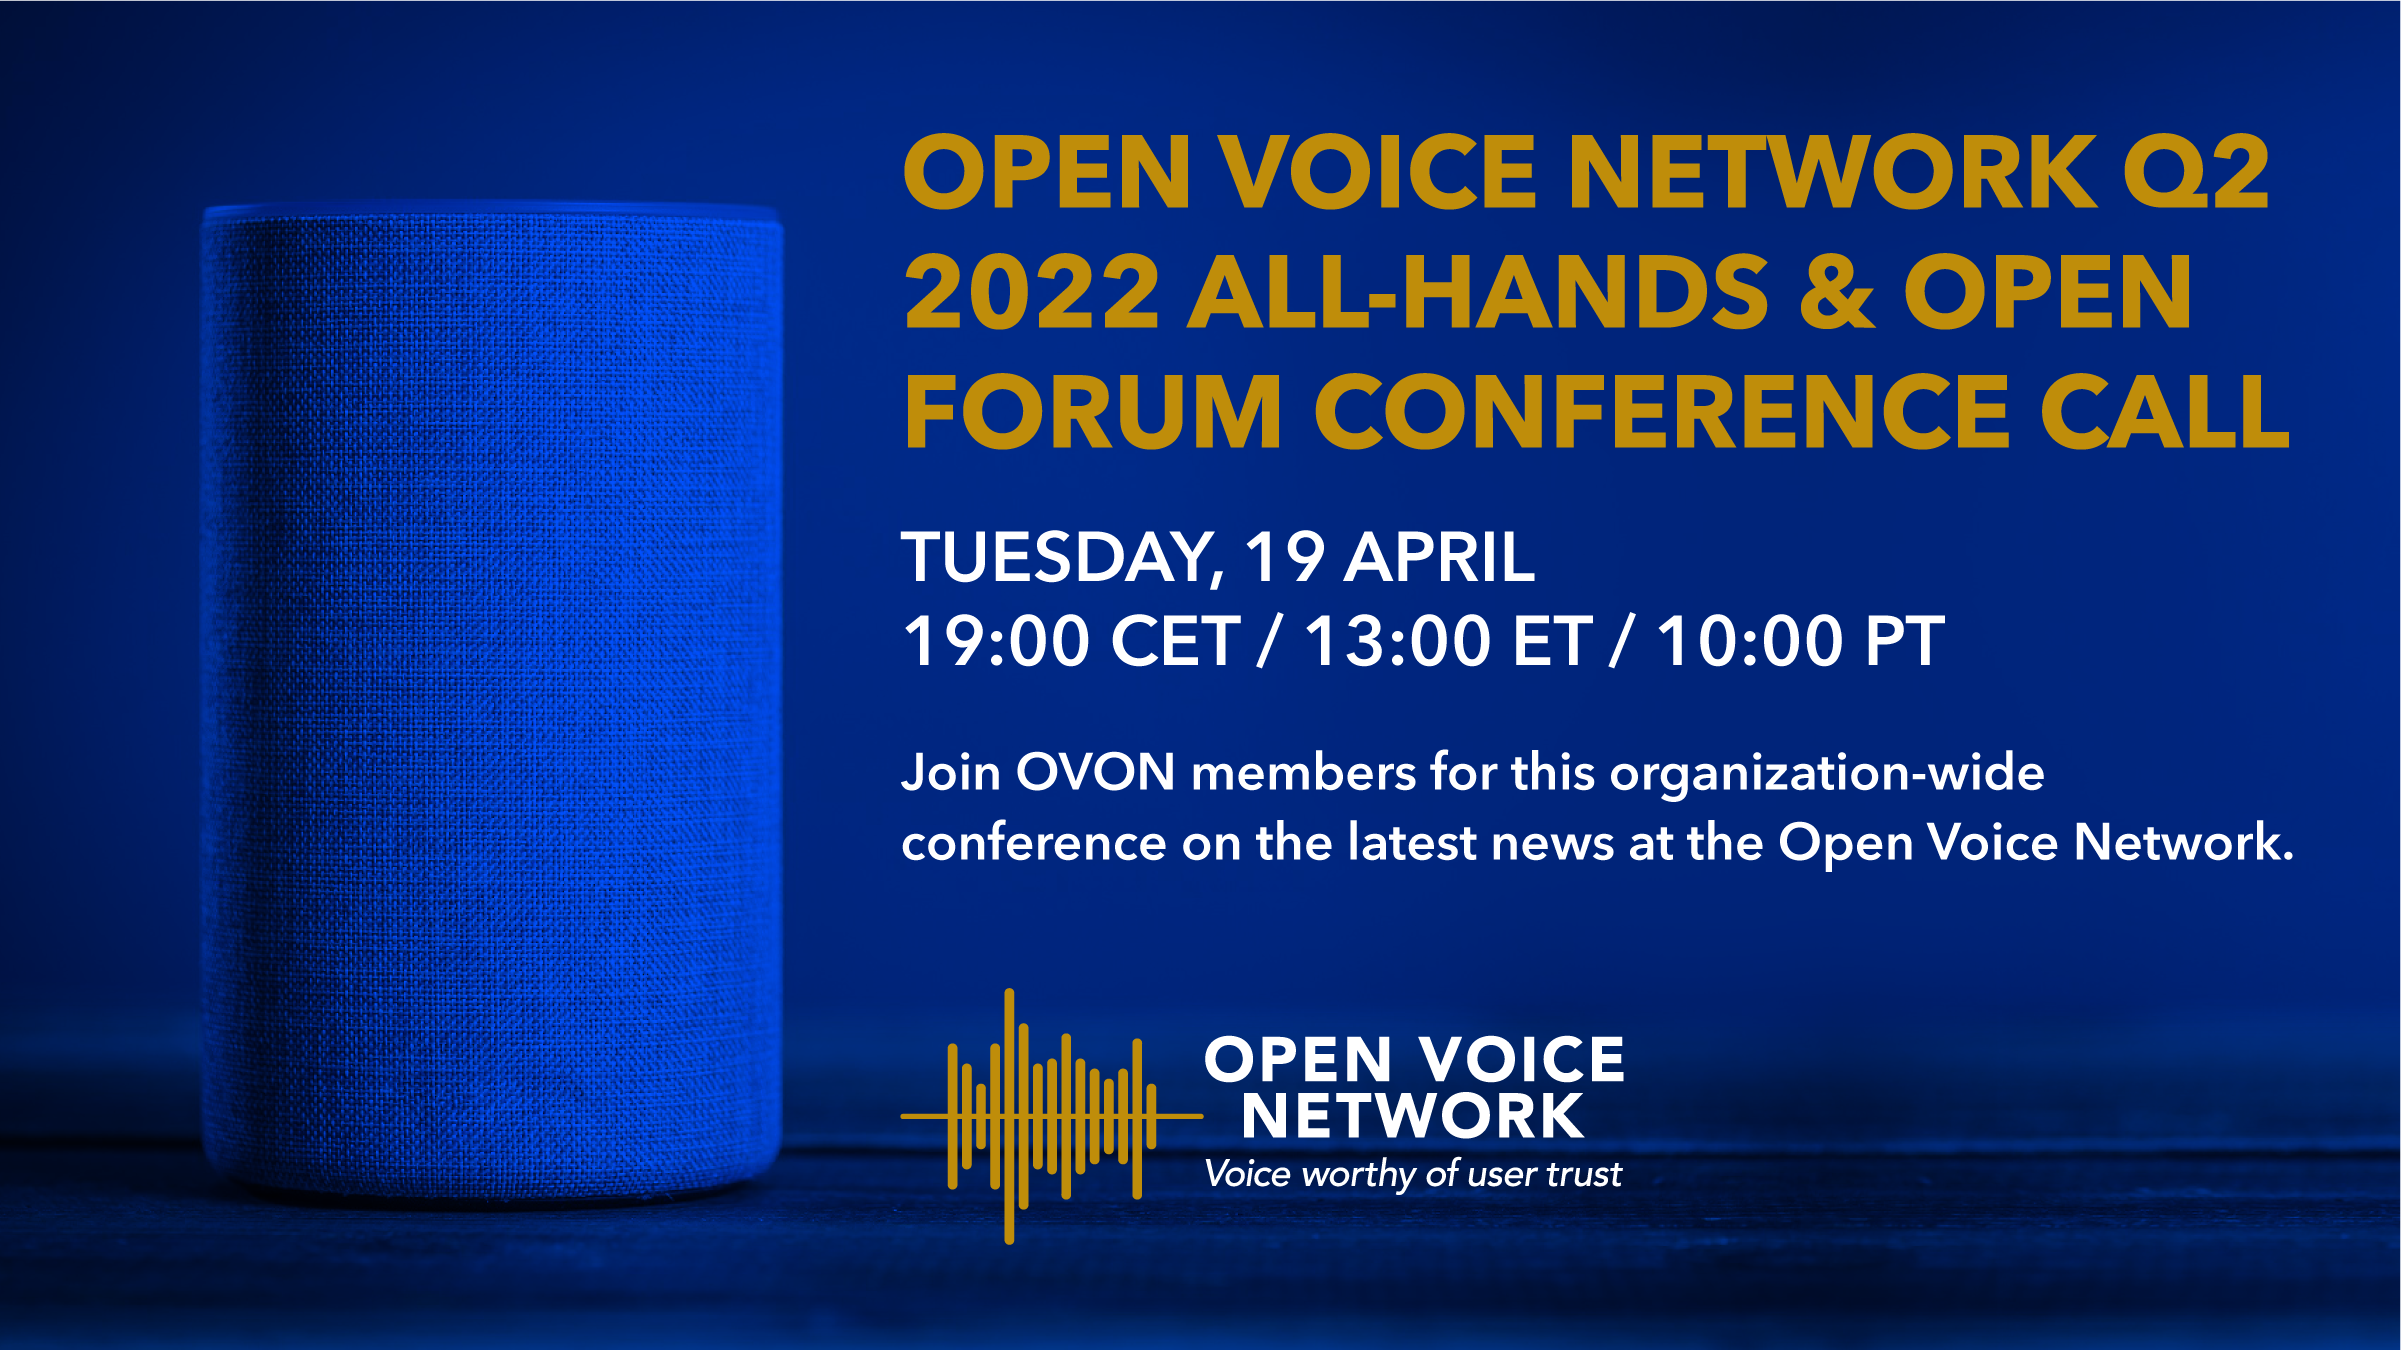 Open Voice Network Q2 2022 All-Hands & Open Forum Conference